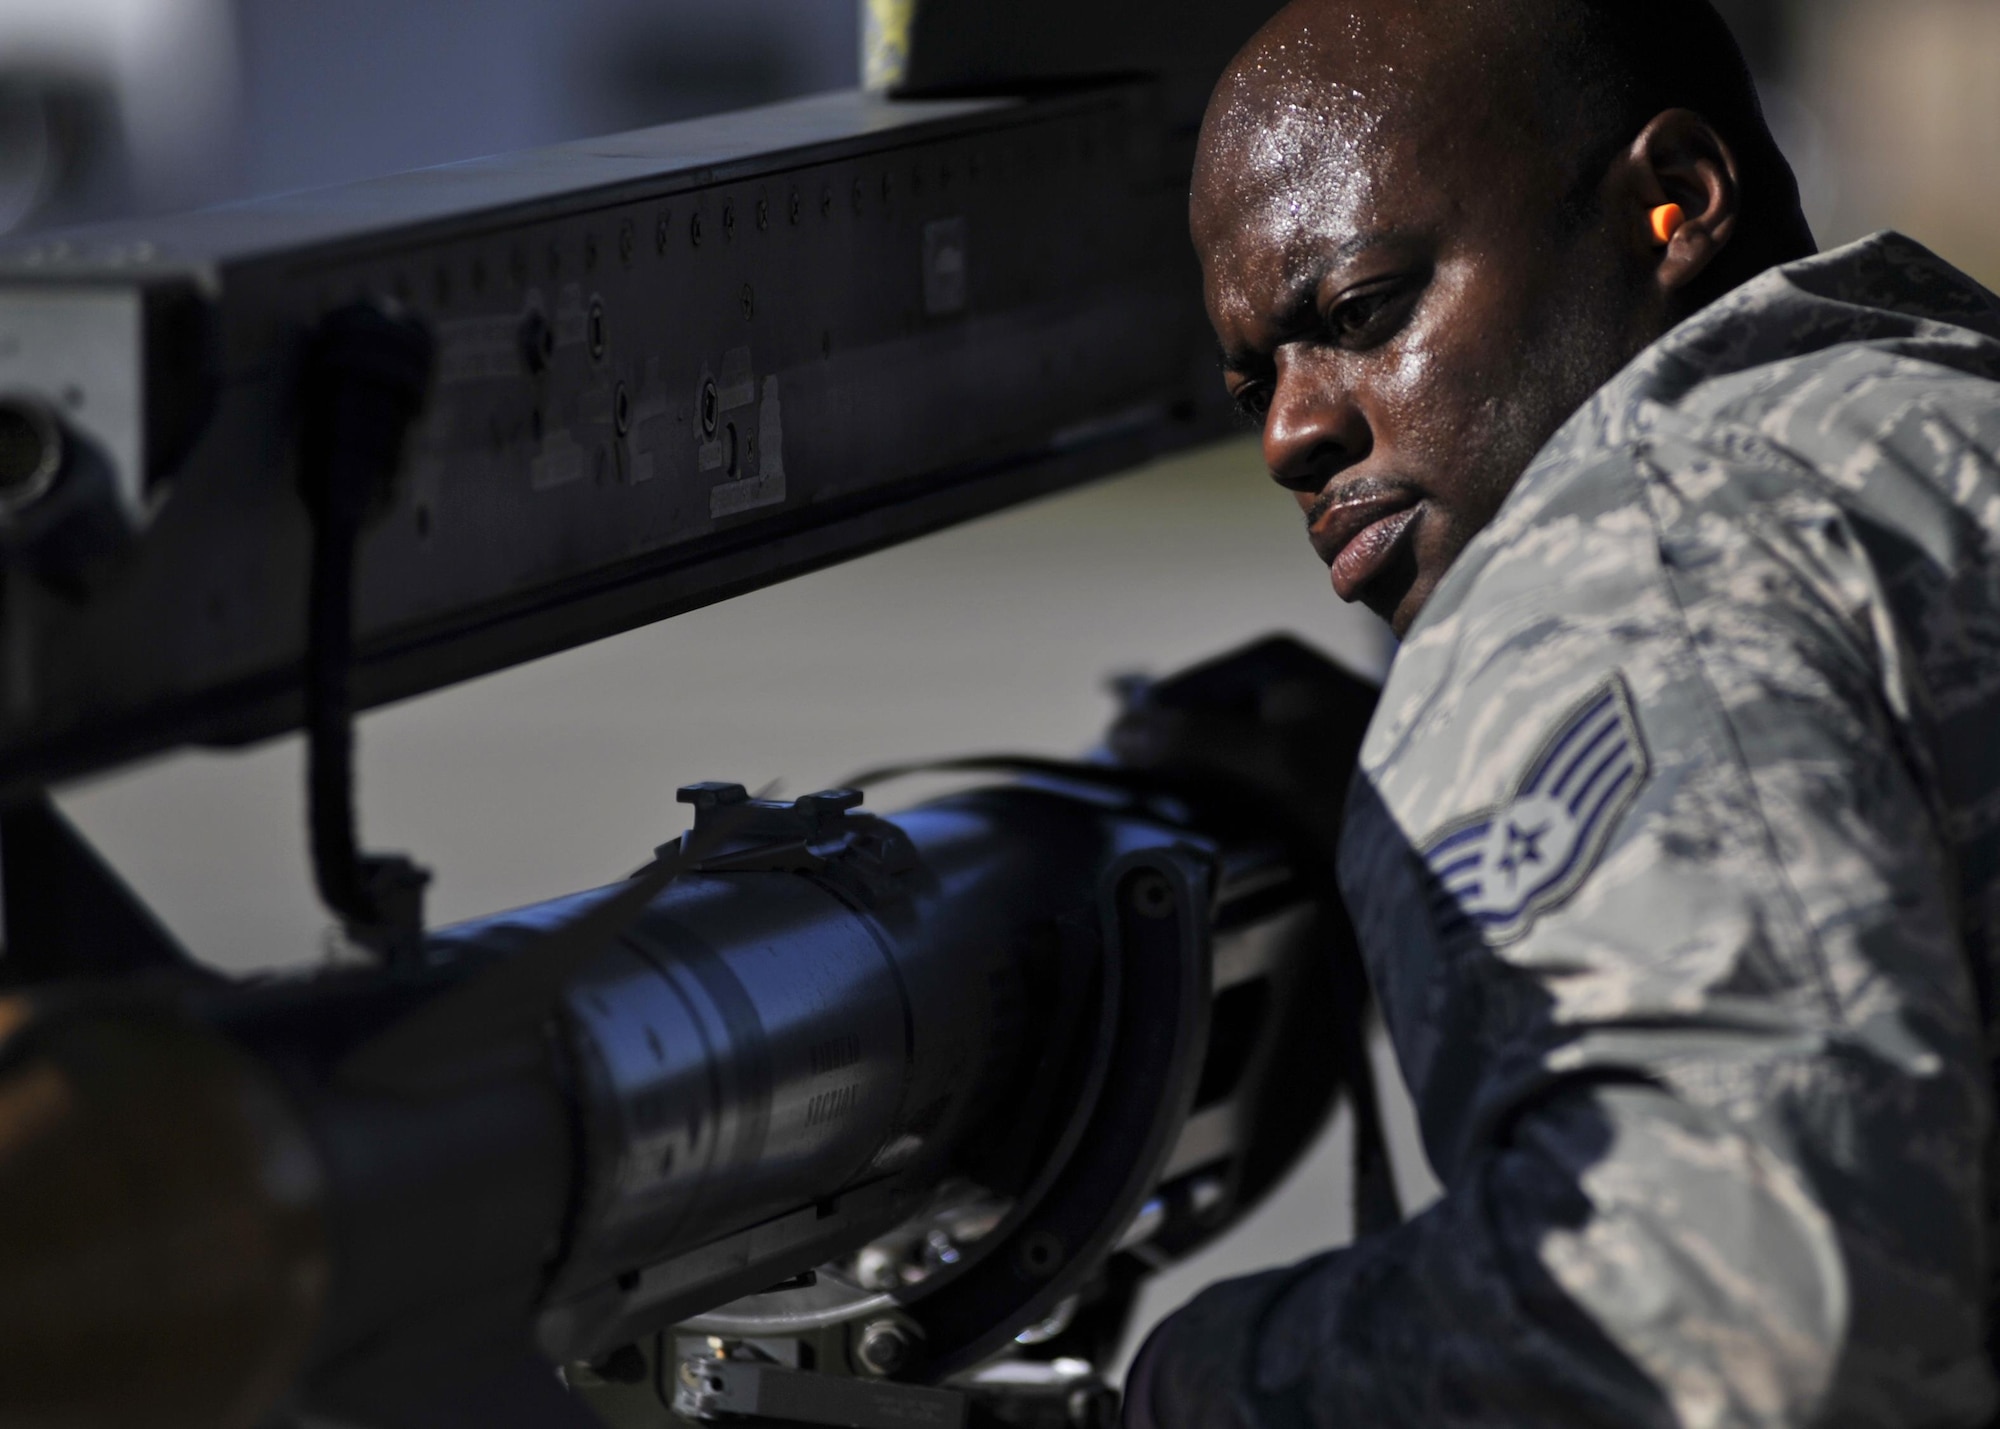 An aircraft armament Airman with the 77th Aircraft Maintenance Unit at Shaw Air Force Base, S.C., begins to unload a missile Dec. 8, 2015, on the flightline at Tyndall AFB, Fla. Airmen from Shaw were at Tyndall for the 53rd Weapons Evaluation Group’s Weapons System Evaluation Program and Checkered Flag 16-1. (U.S. Air Force photo/Senior Airman Sergio A. Gamboa)